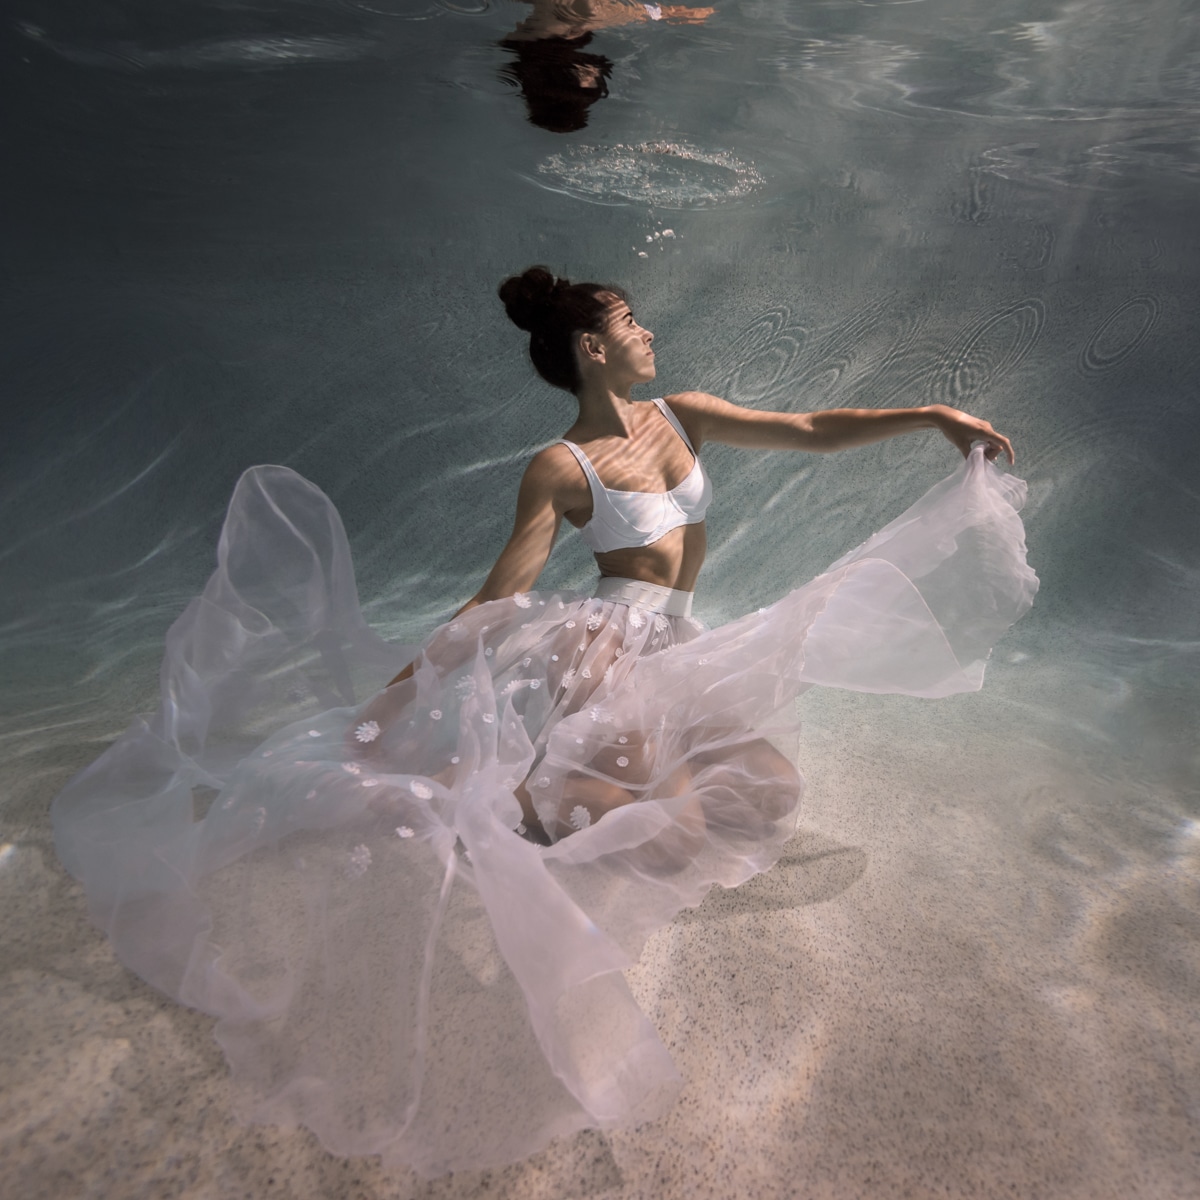 Underwater portrait photo of woman sitting at the bottom, wearing a floating sheer white skirt, with sunbeams